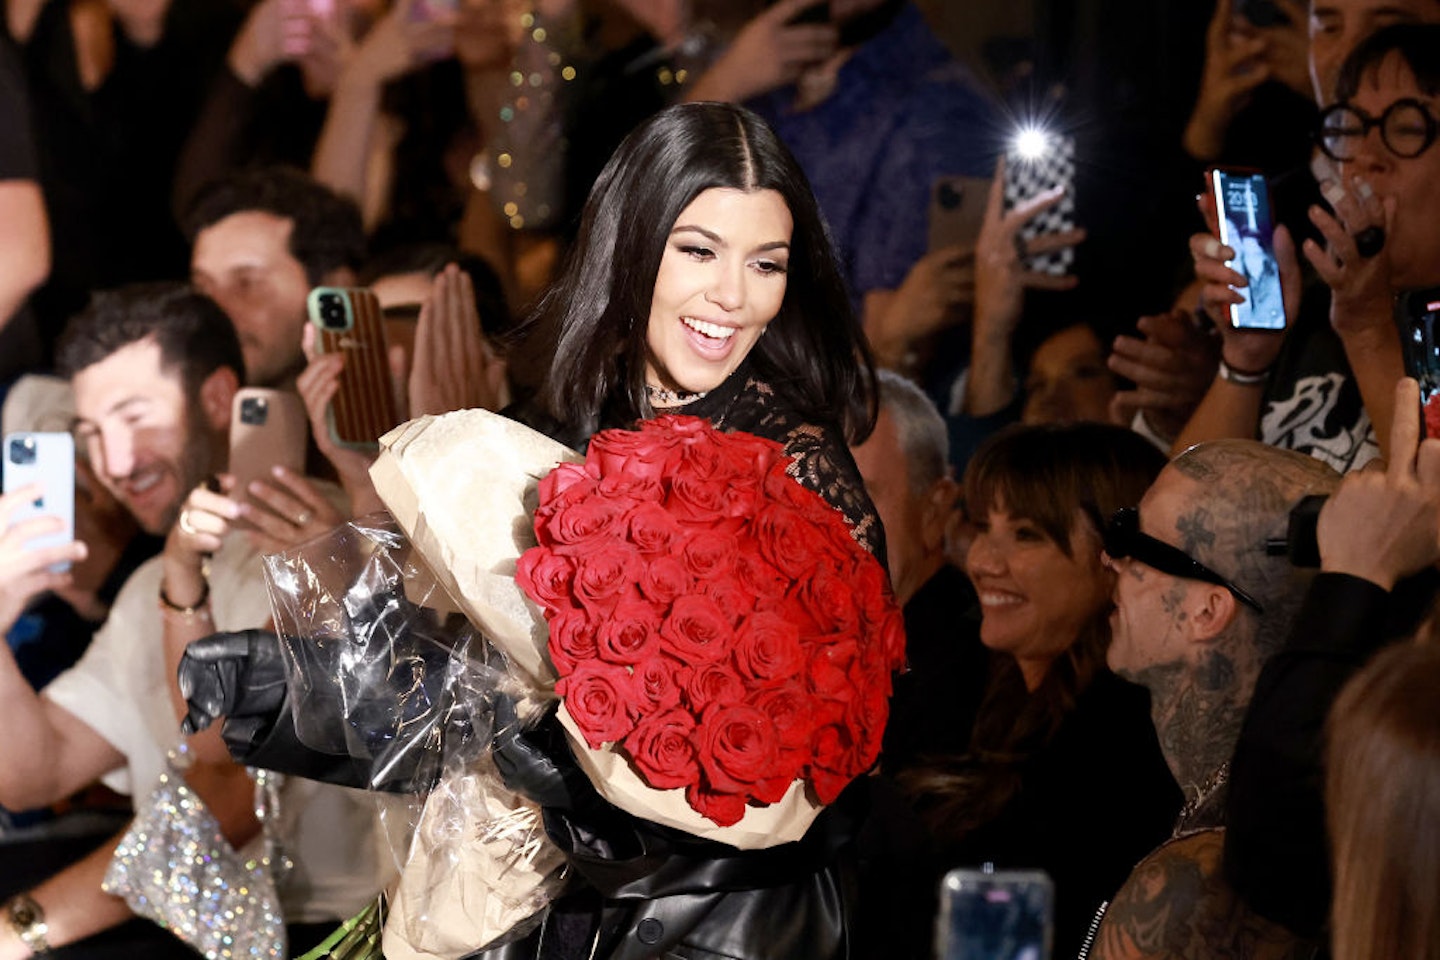 Kourtney holding roses and smiling during her Boohoo fashion show